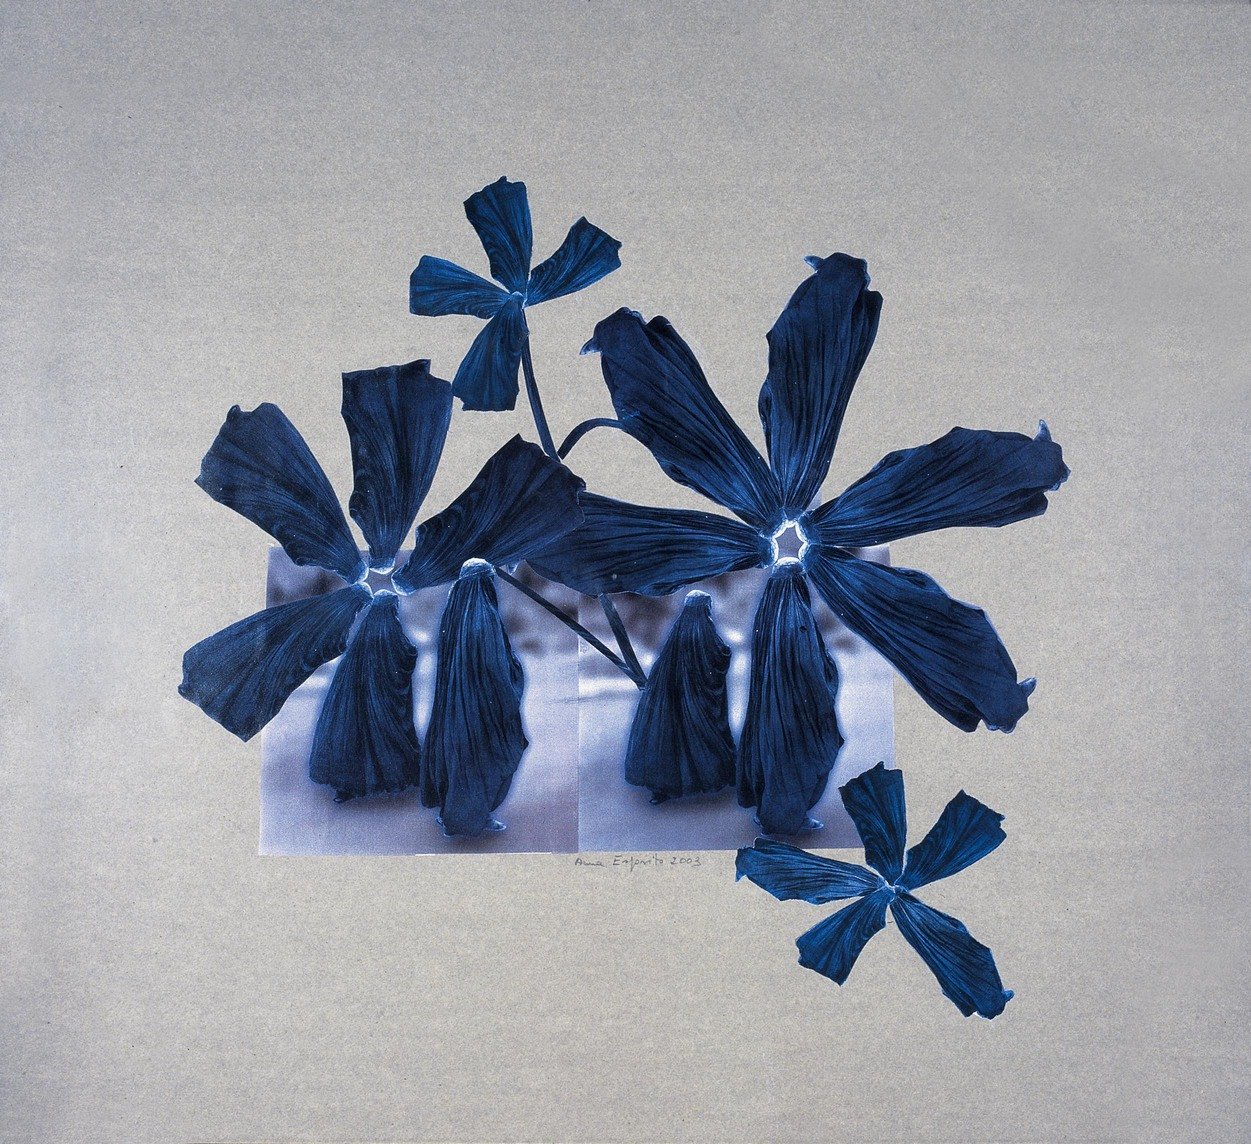 "Burka flowers", 2003,
collage on photo